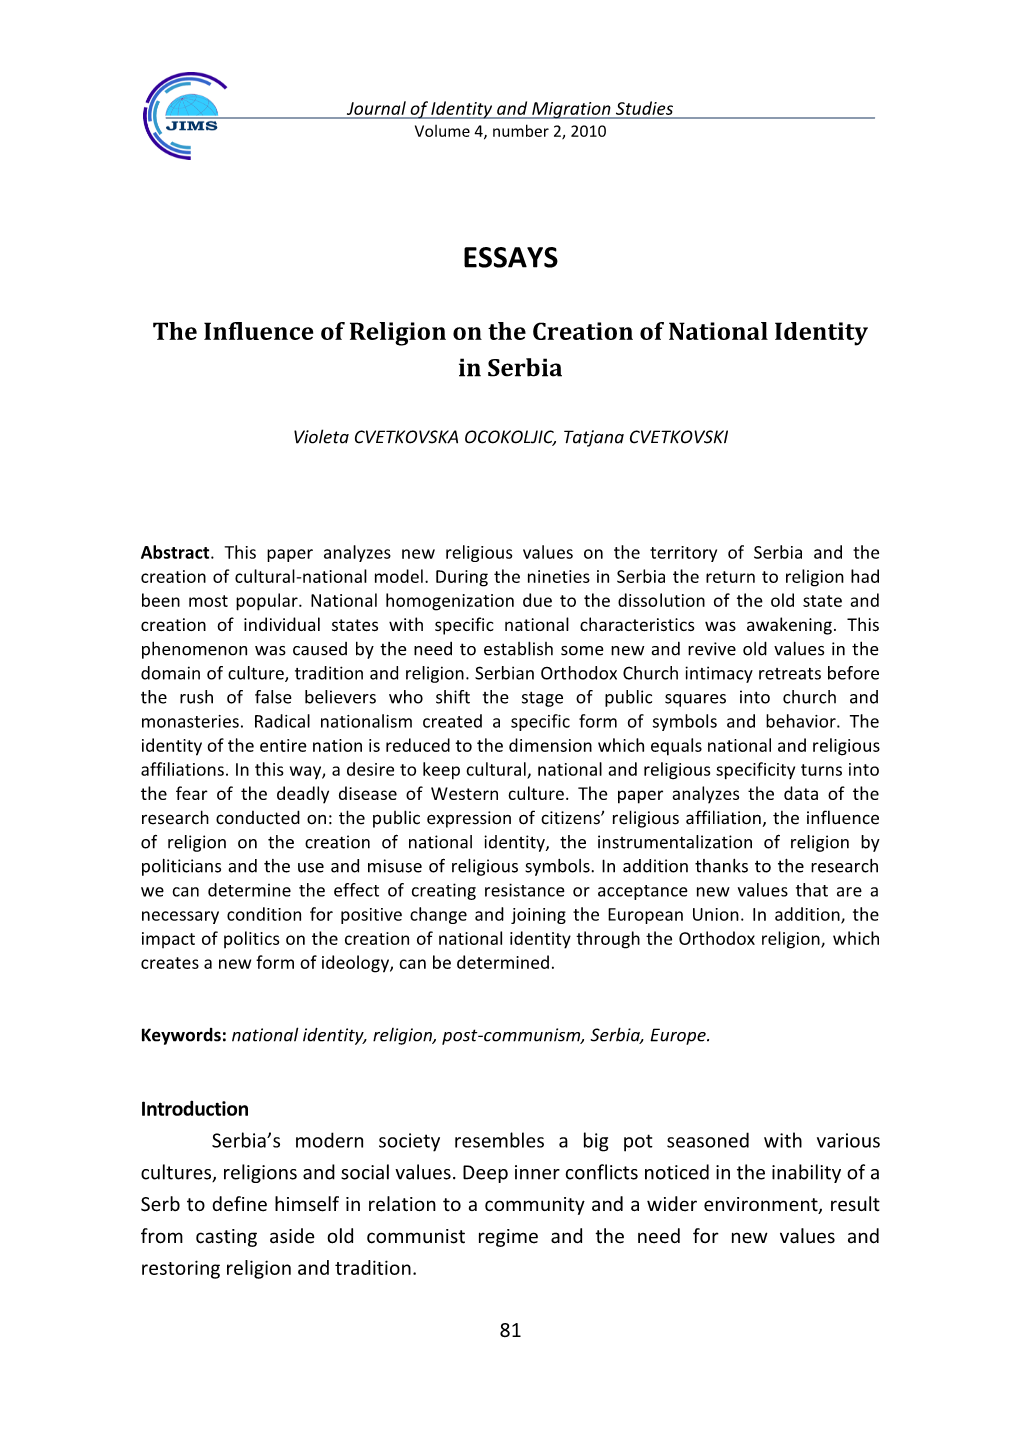 The Influence of Religion on the Creation of National Identity in Serbia